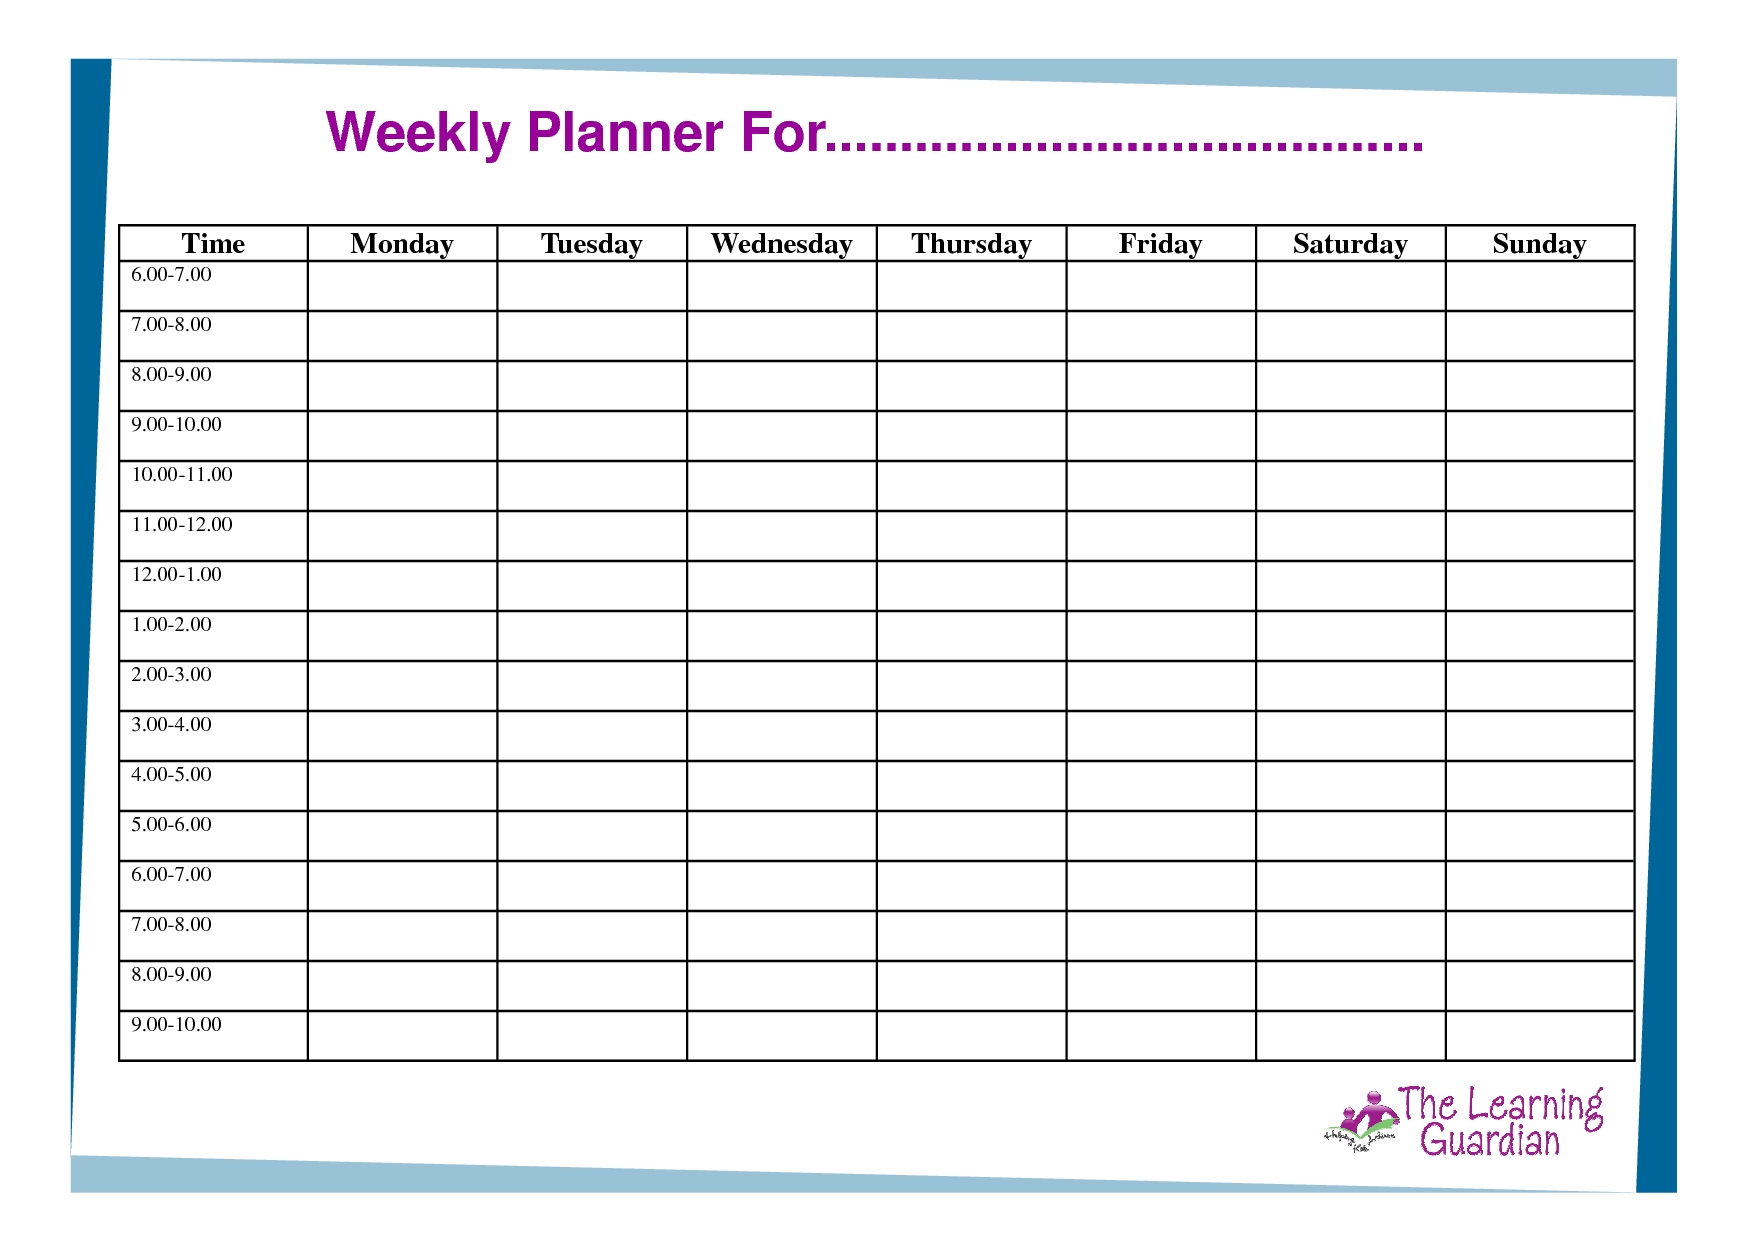 Free Printable Weekly Calendar Templates | Weekly Planner For Time inside Printable Blank Weekly Calendar With Times